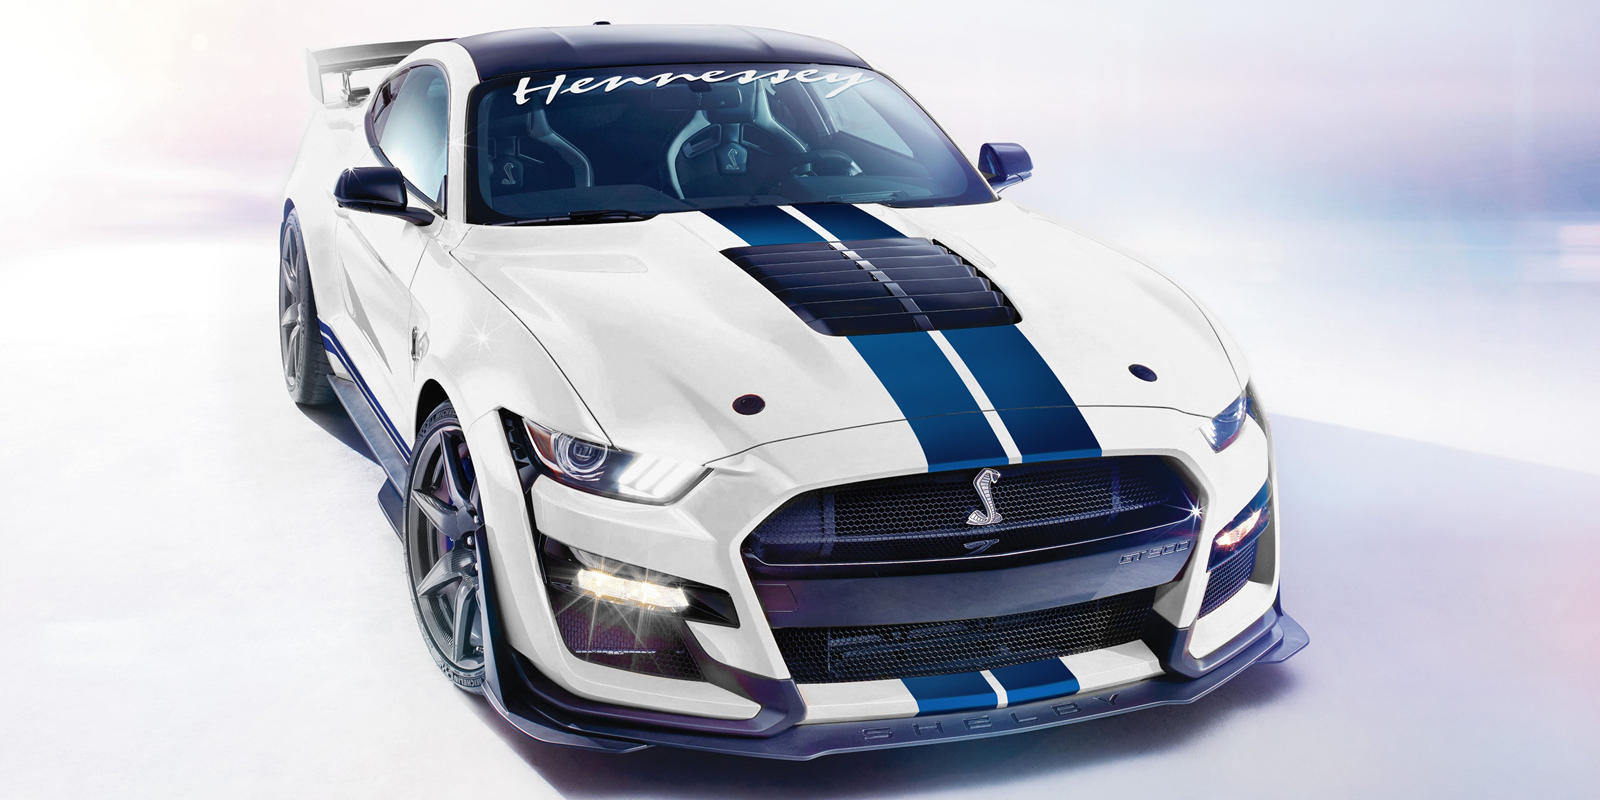 Unleash the Speed: Top 10 High-Performance Cars for Thrill-Seekers - Ford Mustang Shelby GT500 horsepower and iconic design